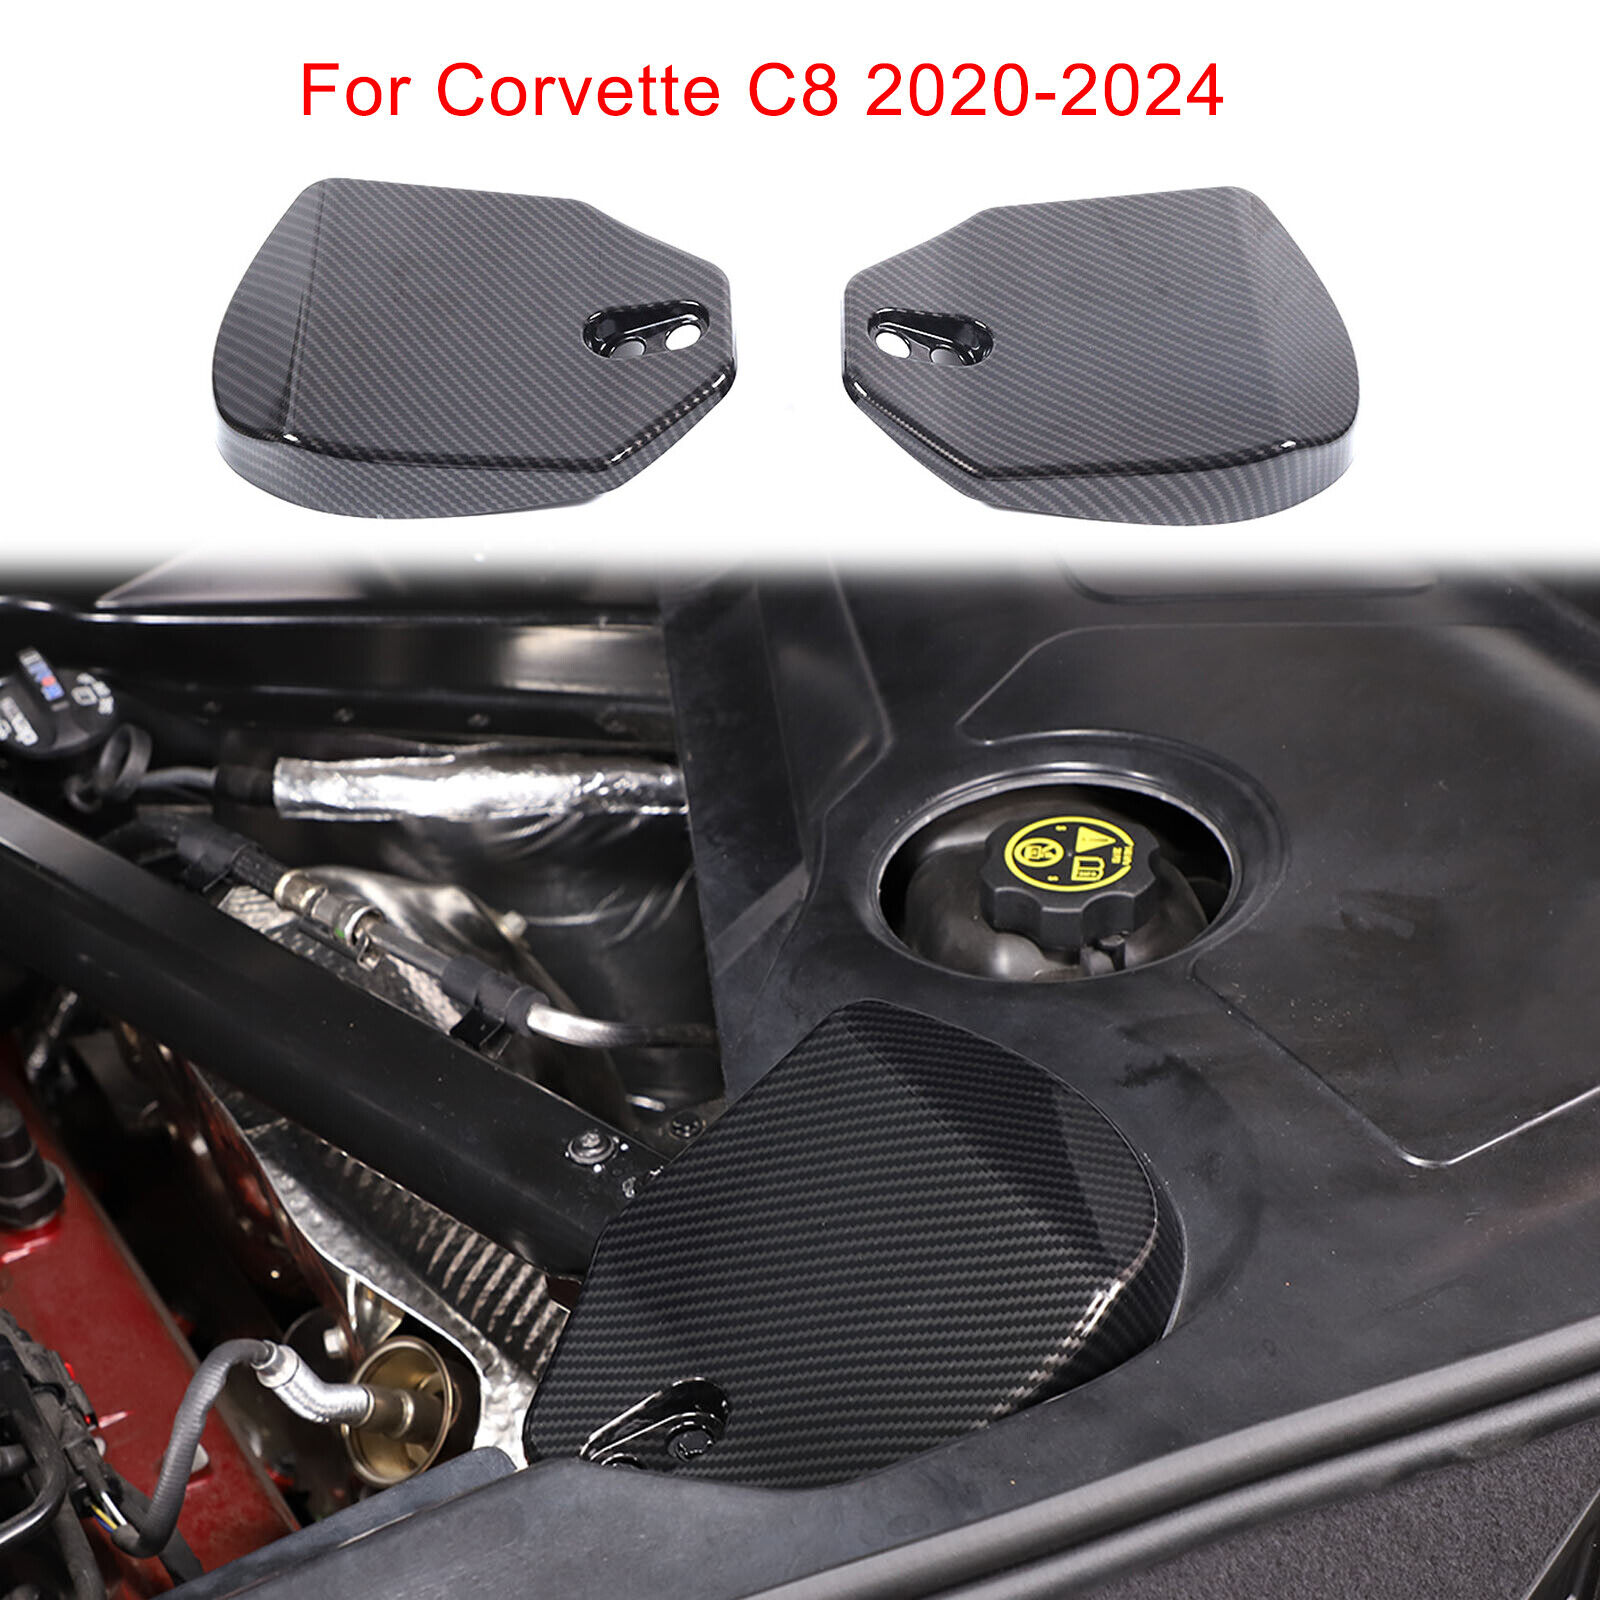 ABS Rear Shock Protection Panel Cover Trim For Corvette C8 2020-2024